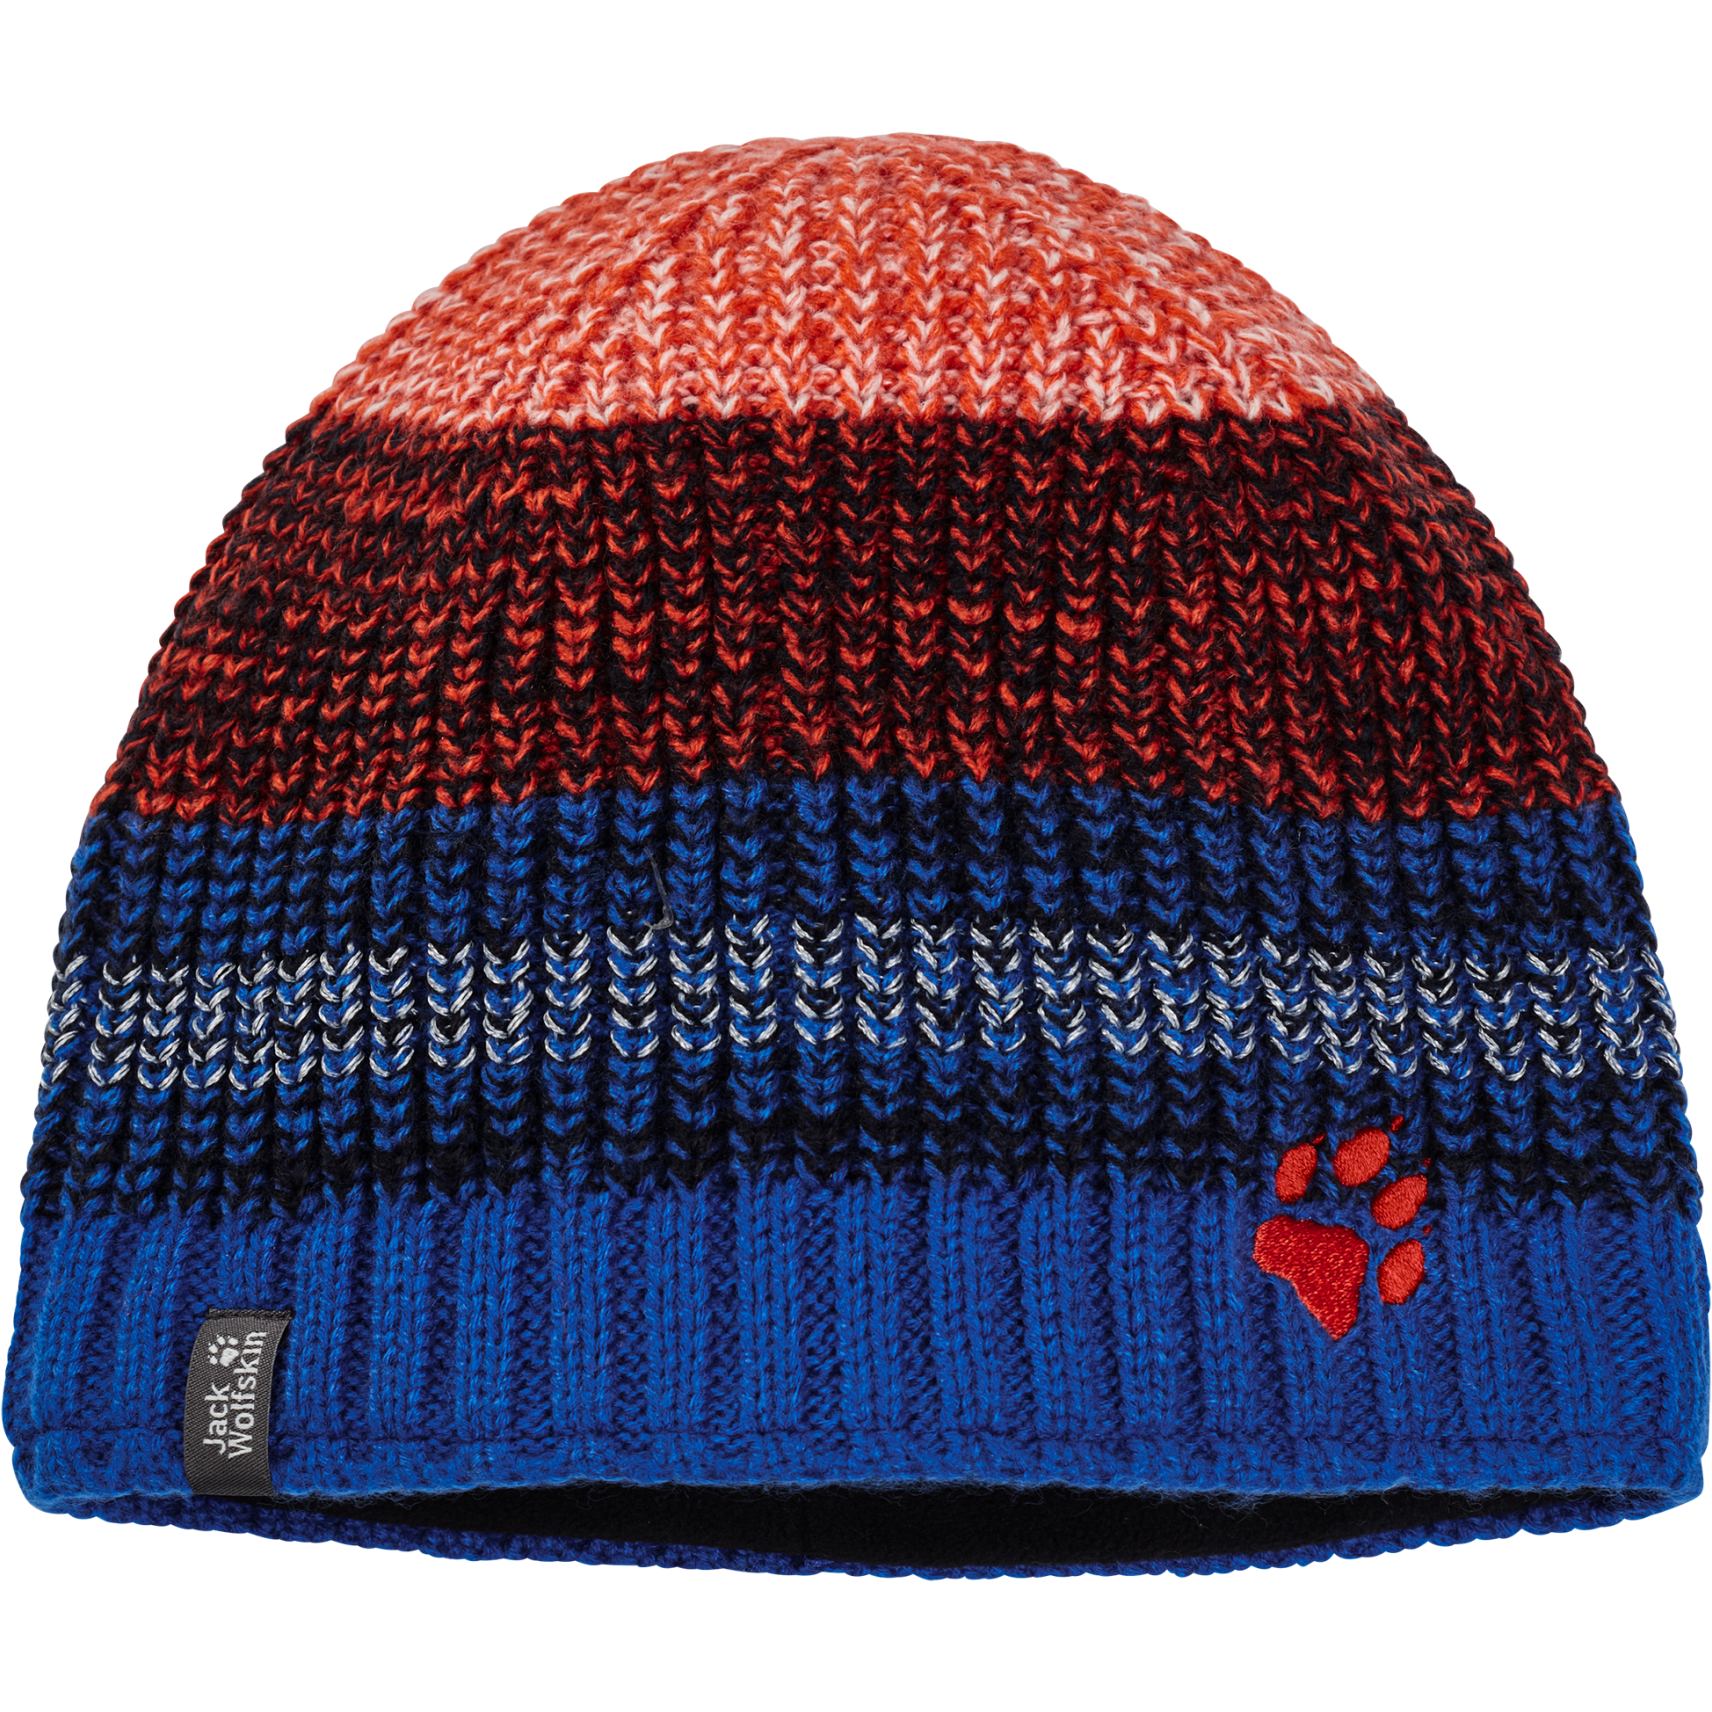 Picture of Jack Wolfskin Stormlock Nighthike Cap Kids - active blue